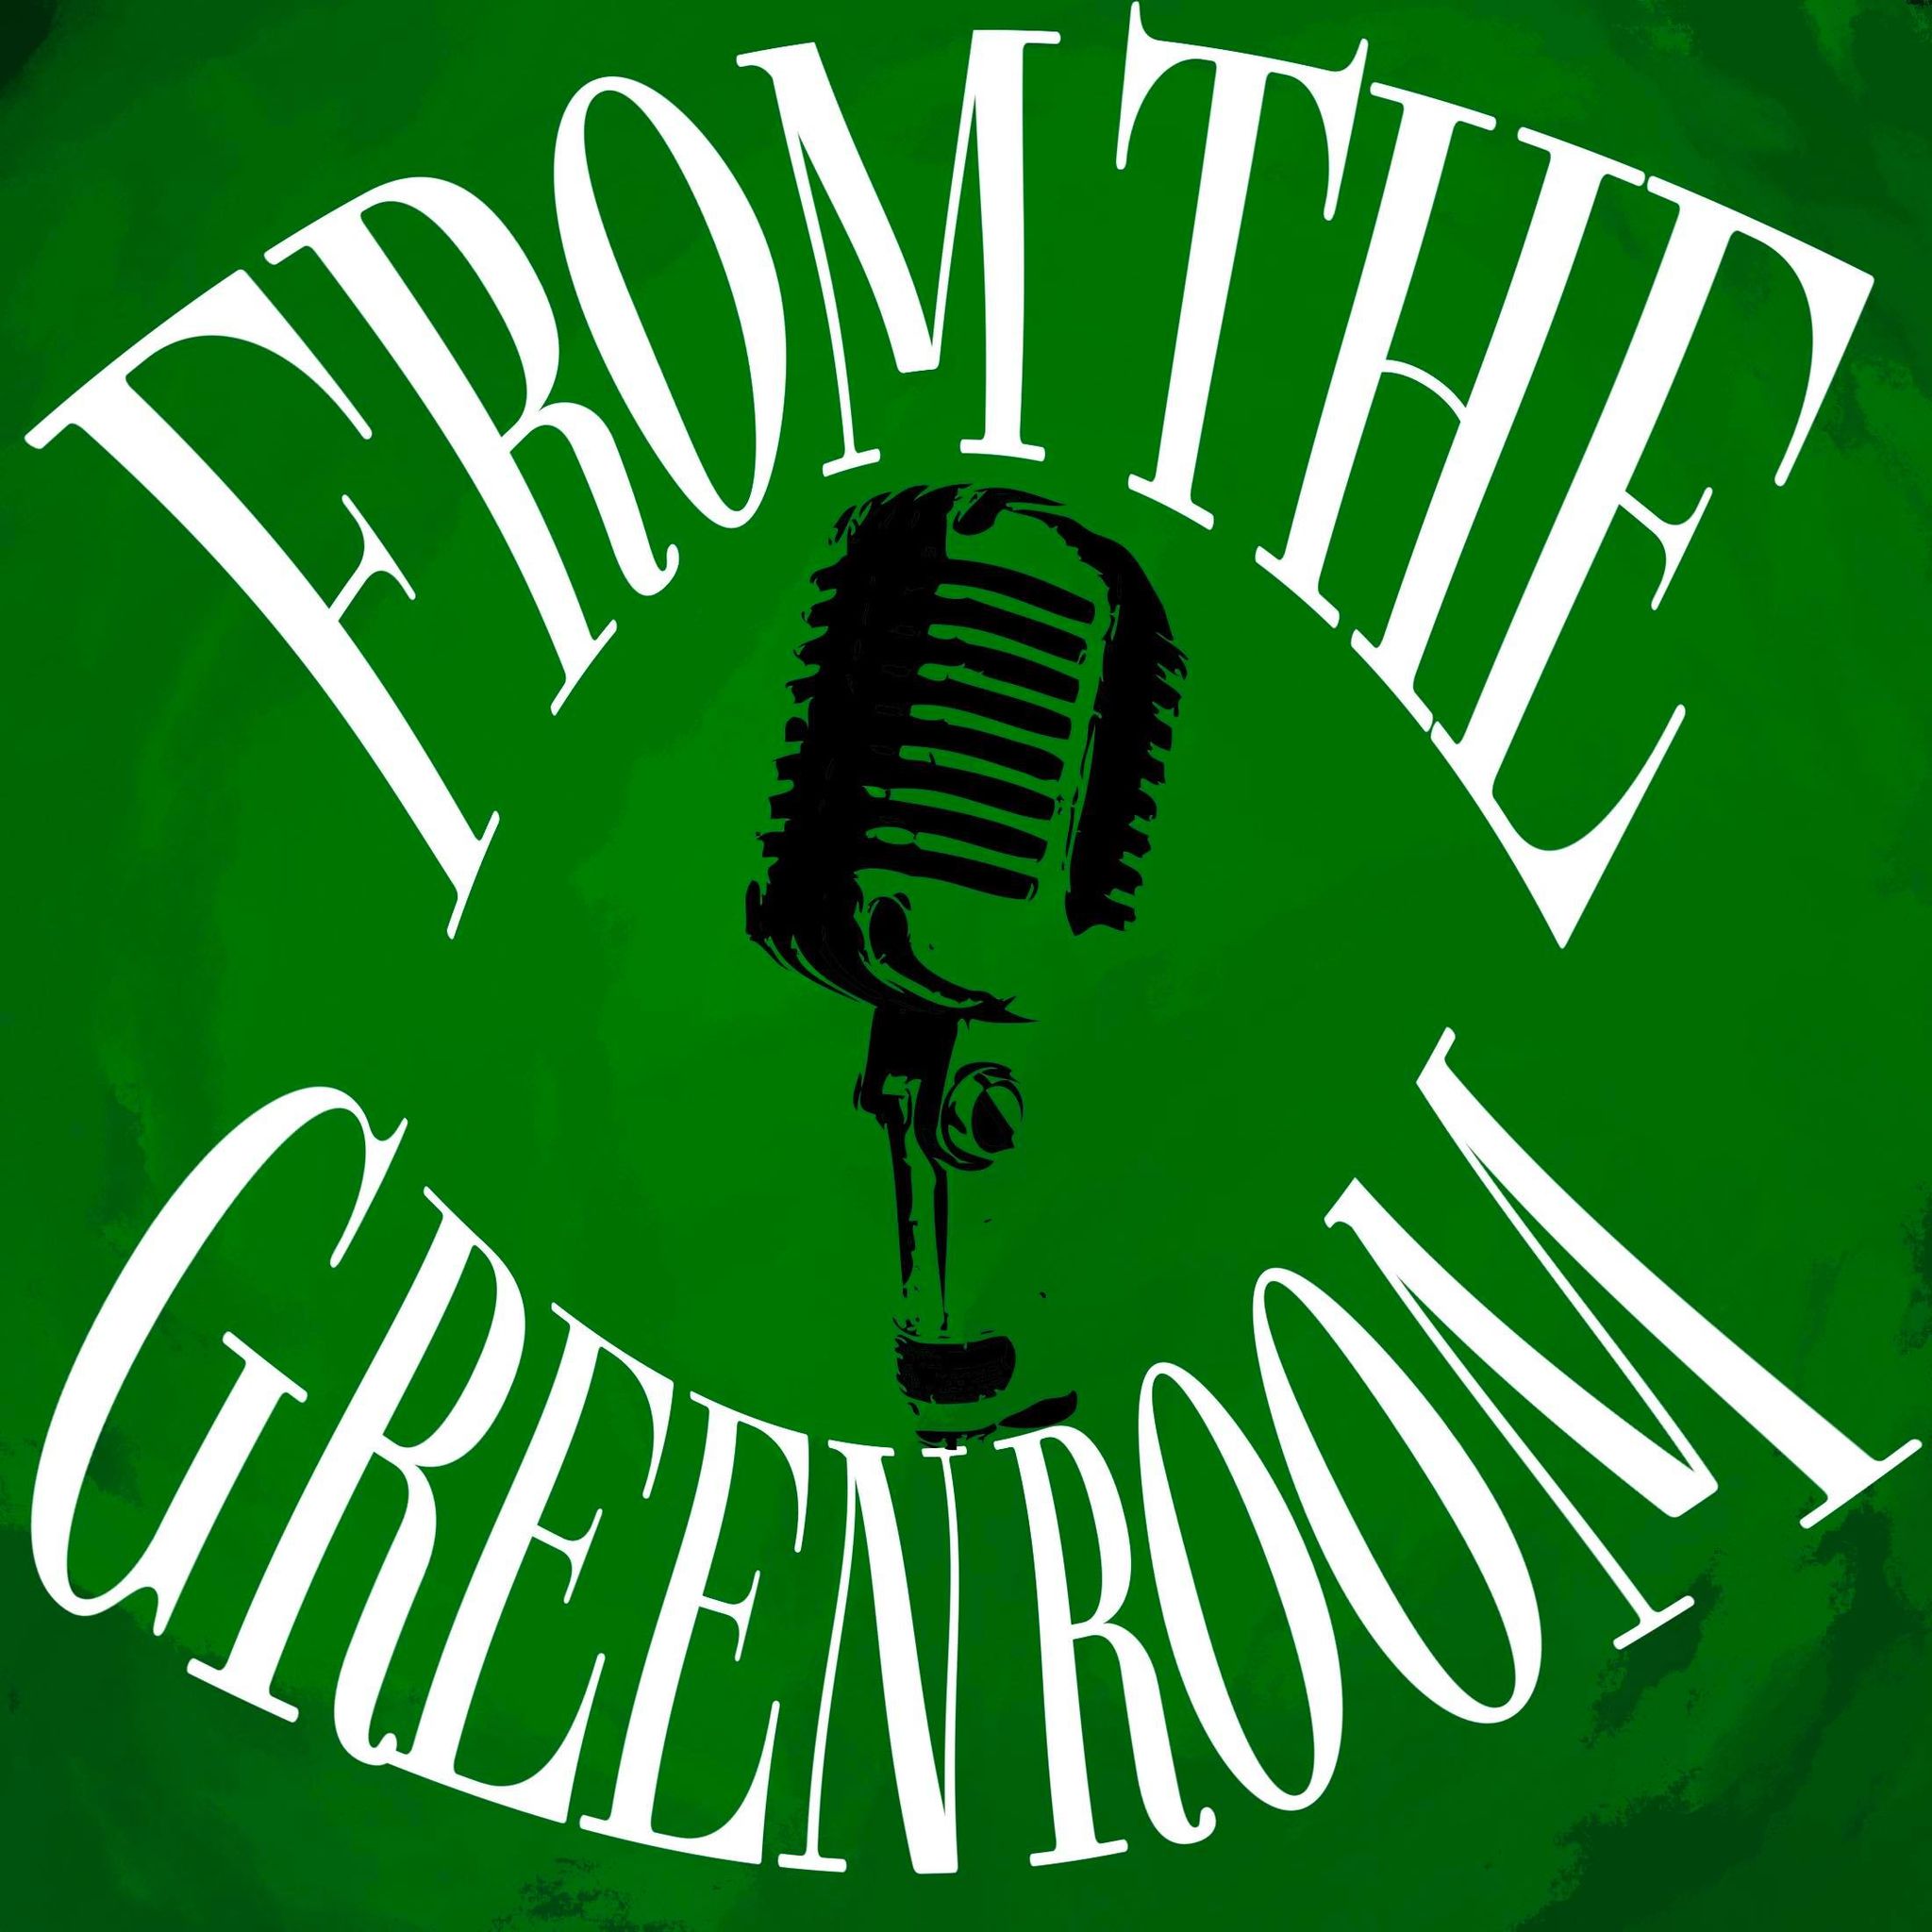 From the Green Room Ep 38: I sit down with the guys from the band Fleischkrieg